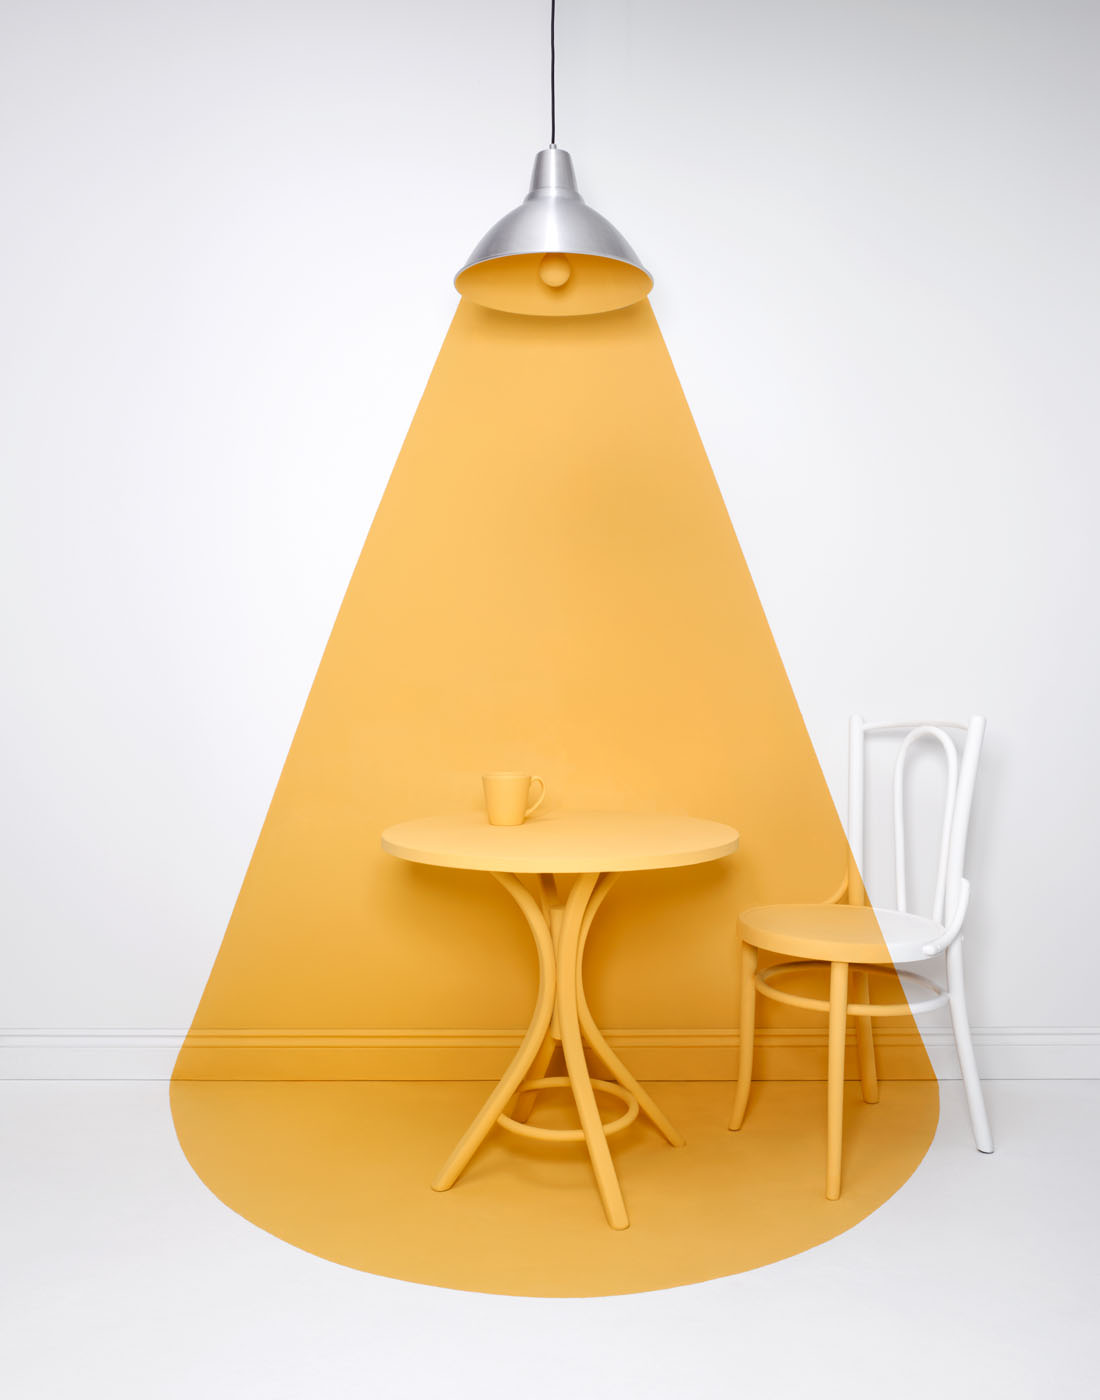 Painted yellow light beam by Alexander Kent London based still life and product photographer.